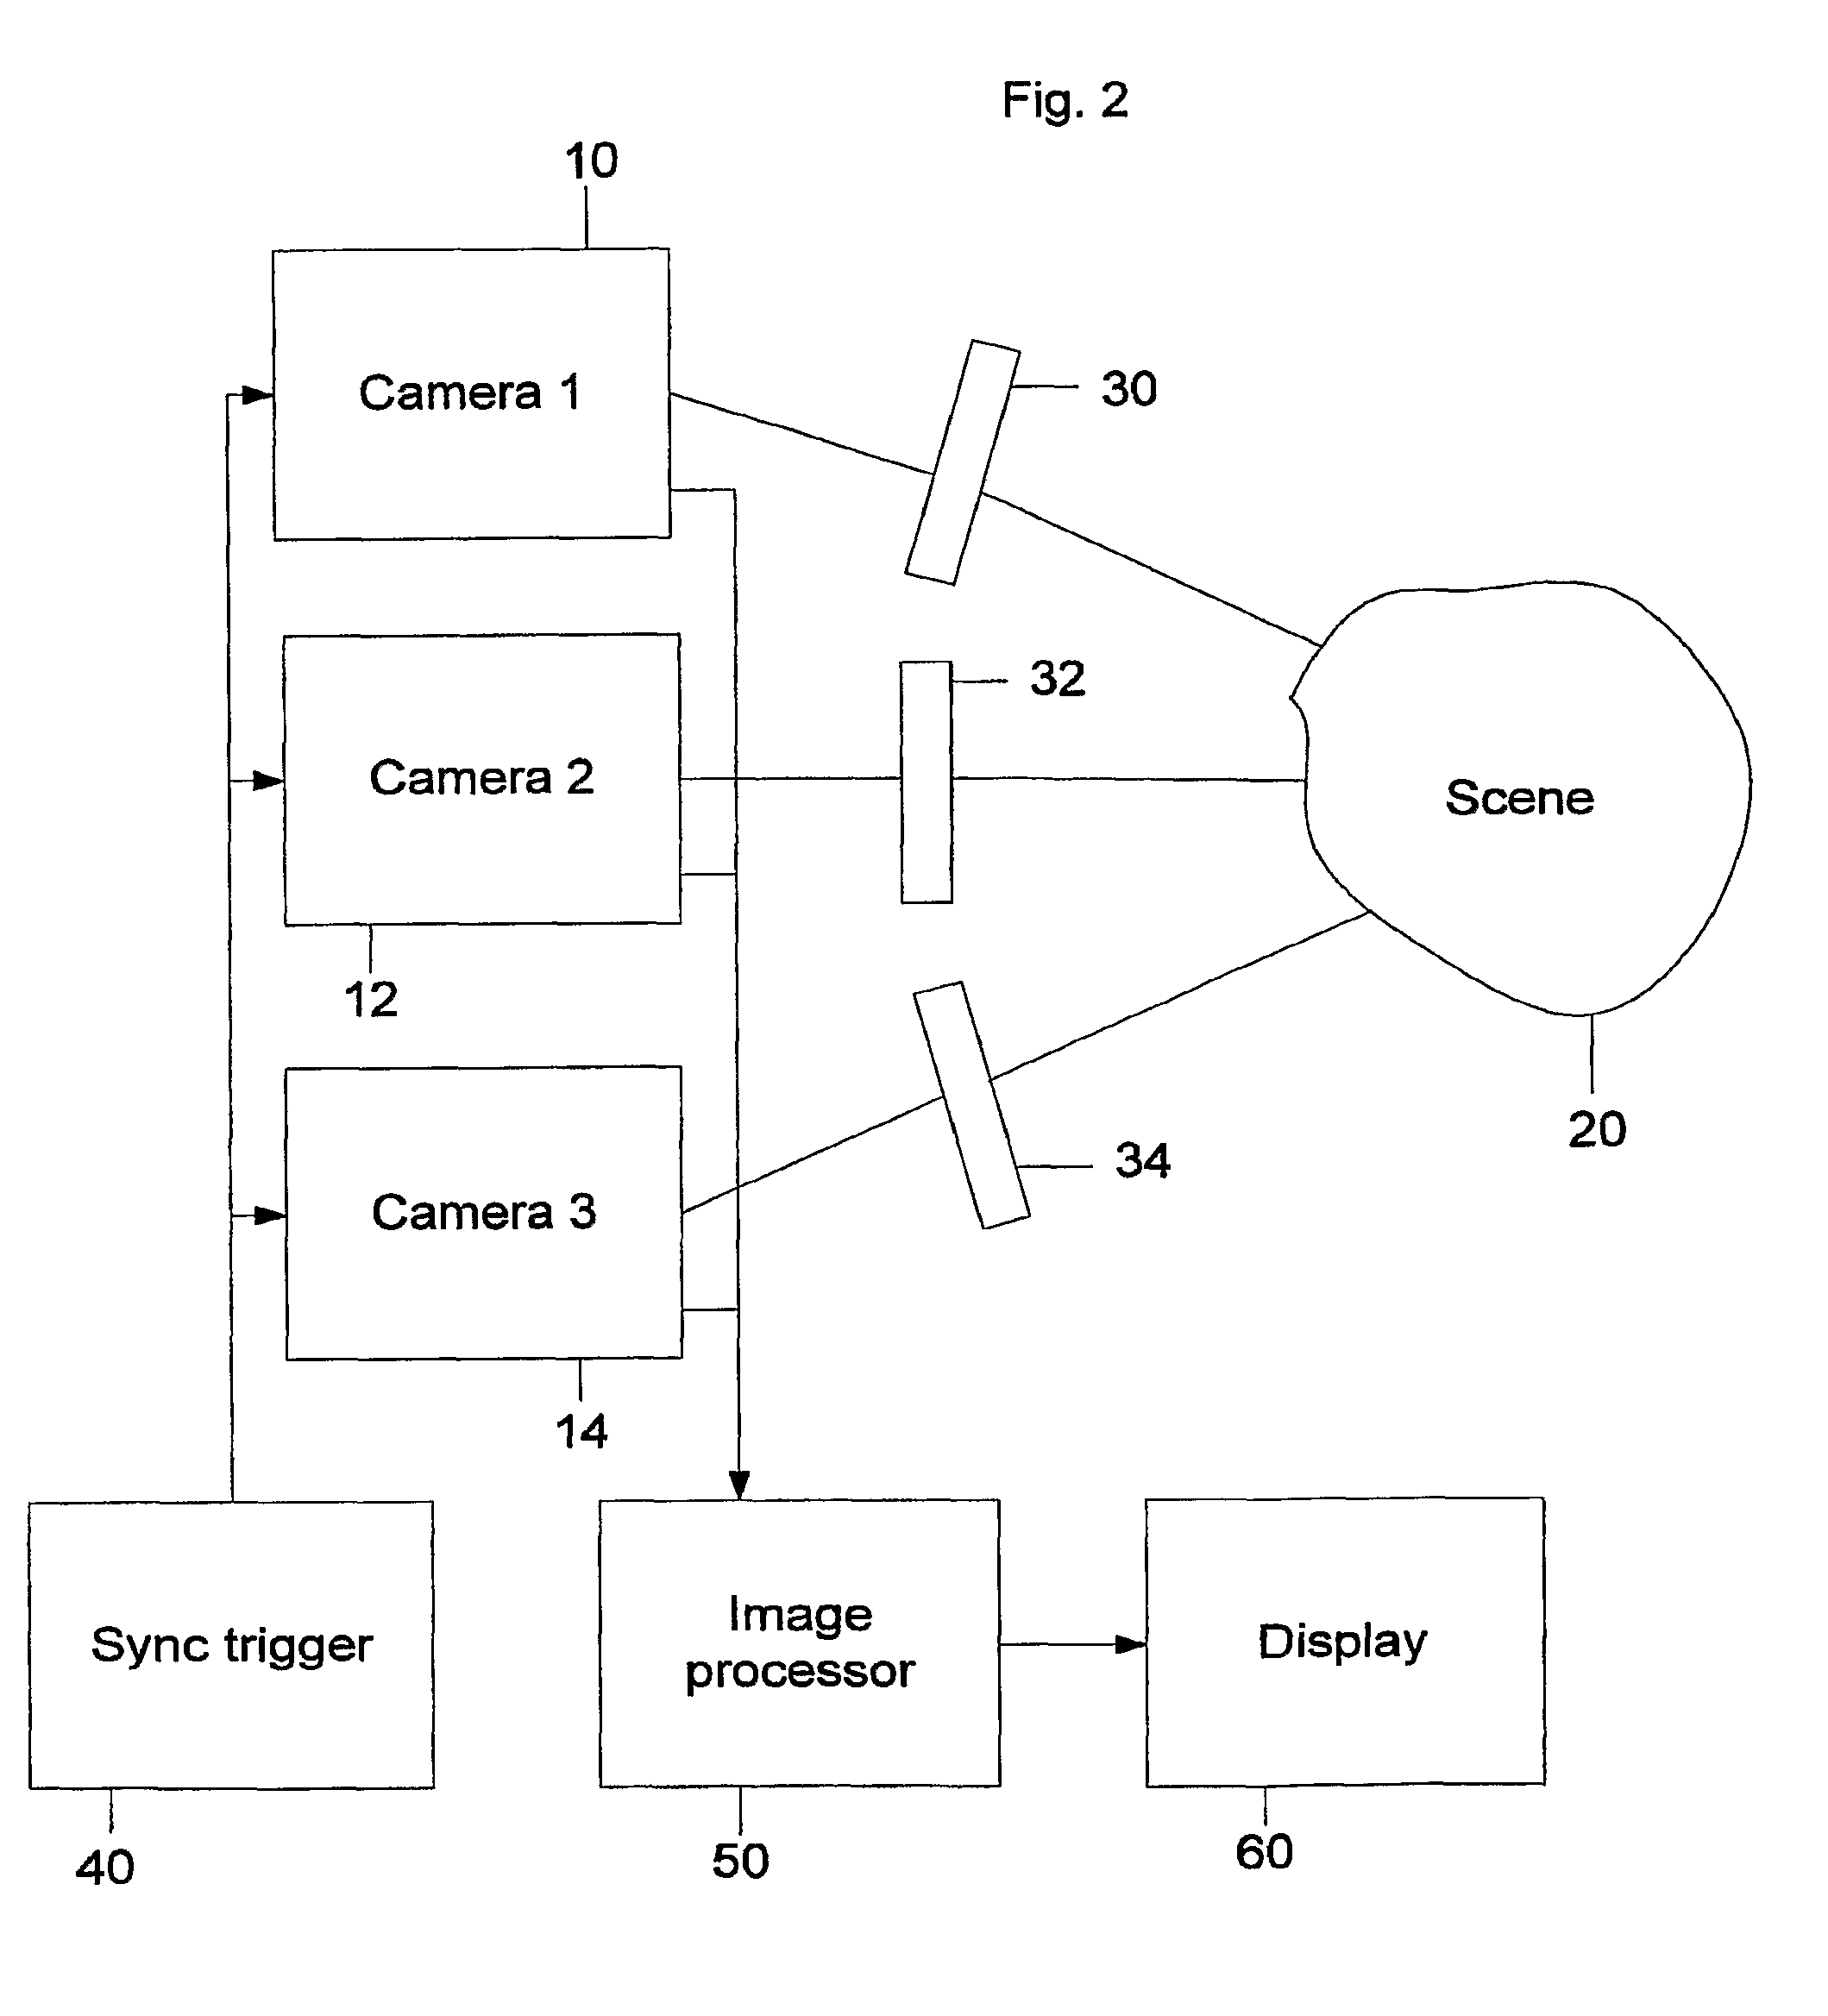 Separation and contrast enhancement of overlapping cast shadow components and target detection in shadow using polarization